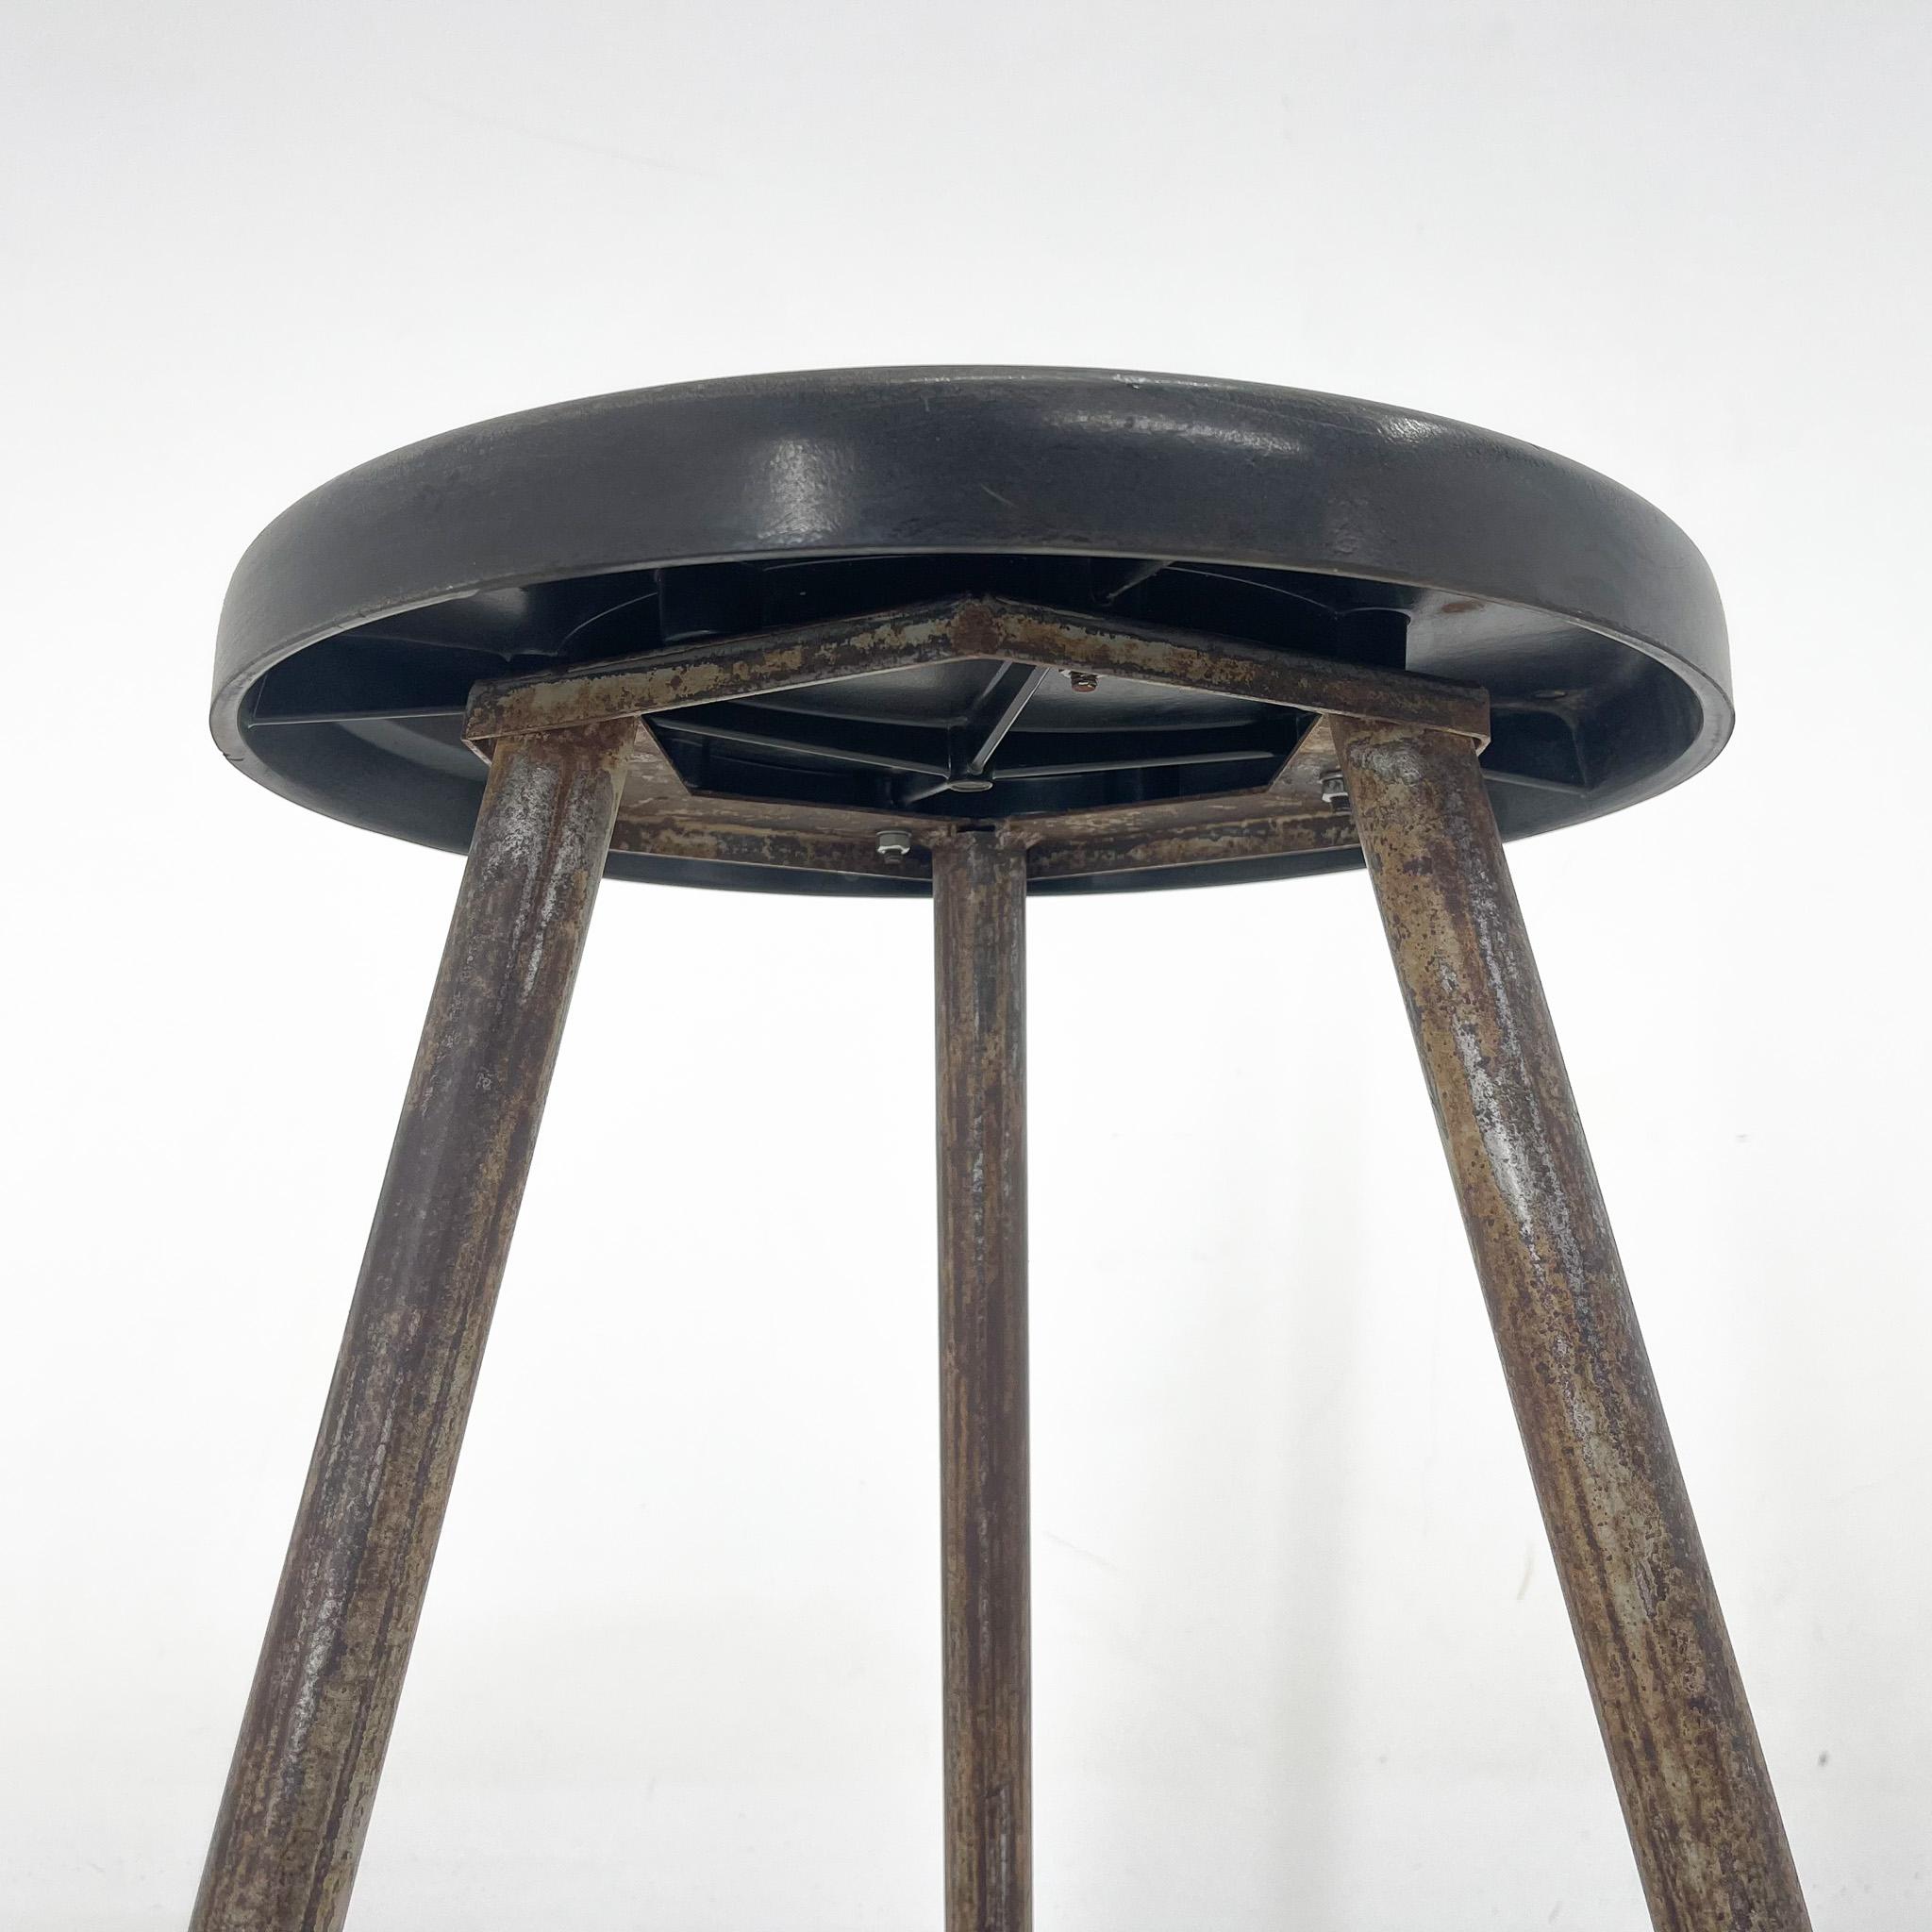 Steel Vintage Industrial Iron Tripod Stool with Original Plastic Seat, 1950s For Sale